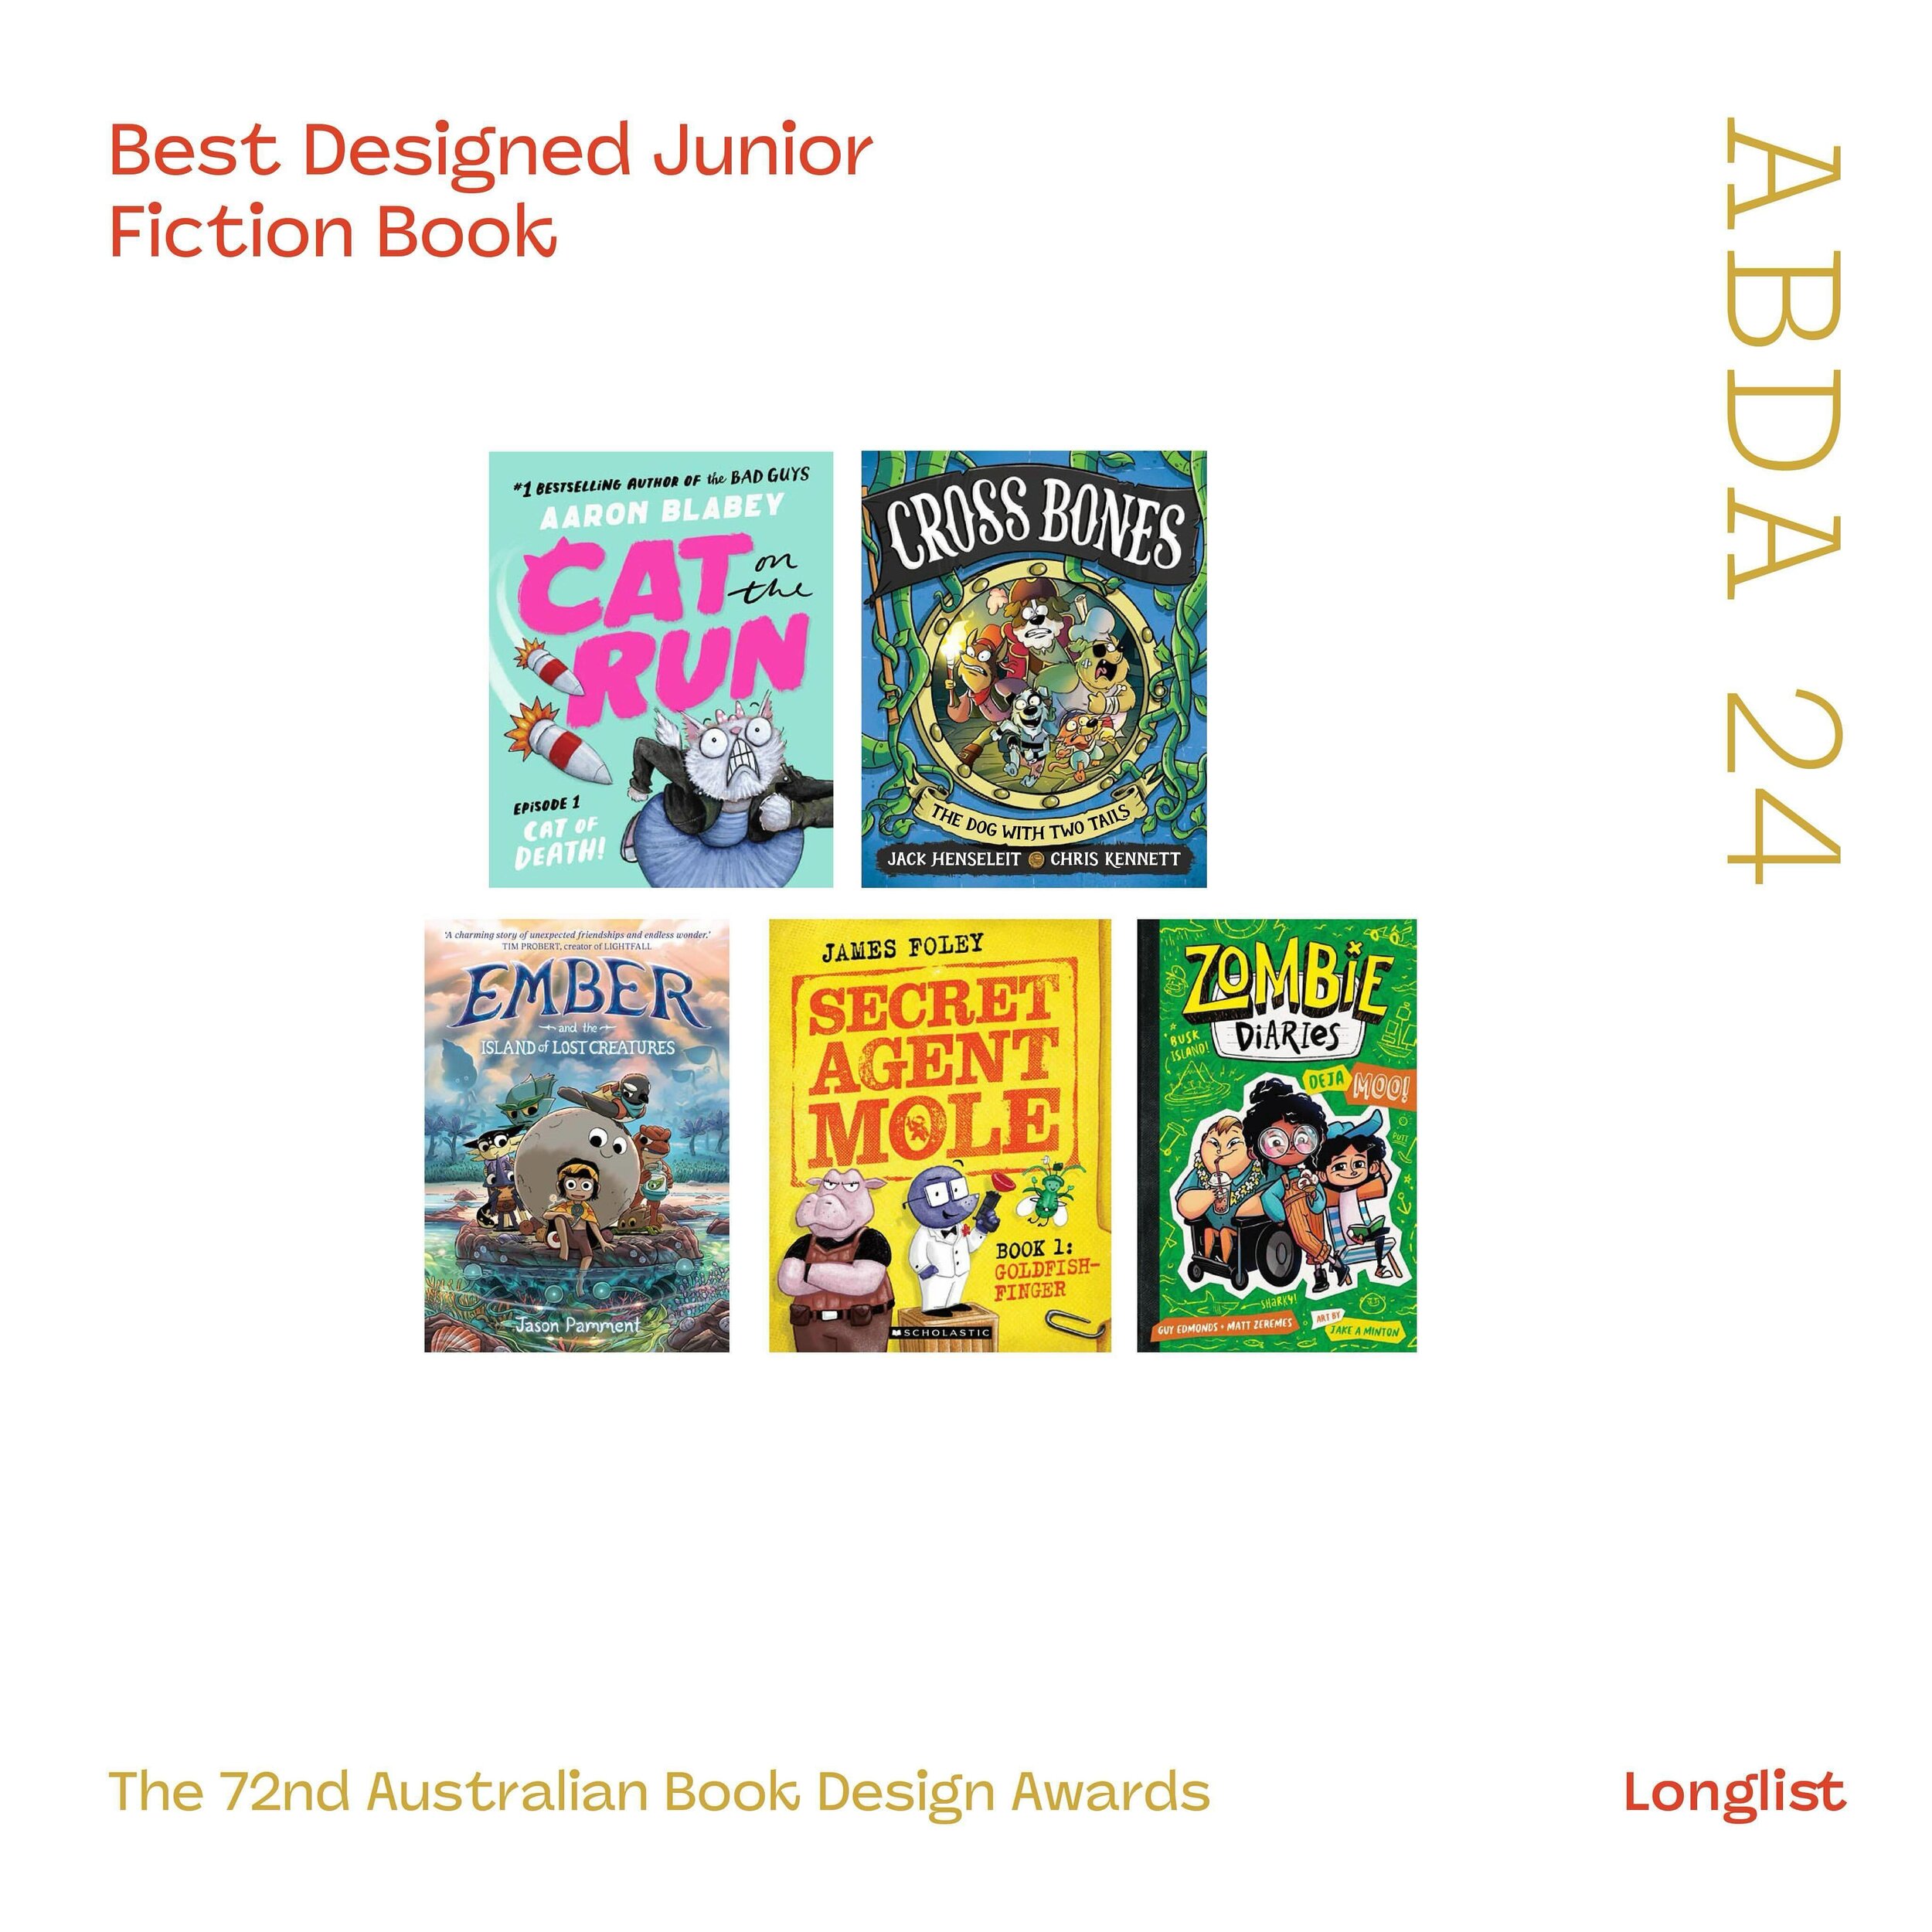 Fantastic news for our Pirate Pooches and for our brilliant designer @hannahjanzen_ as Cross Bones is nominated for BEST DESIGNED HUNIOR FICTION BOOK!! @jack.henseleit and I are so proud!

Hannah is also nominated for her work on @jamesfoleybooks &ld